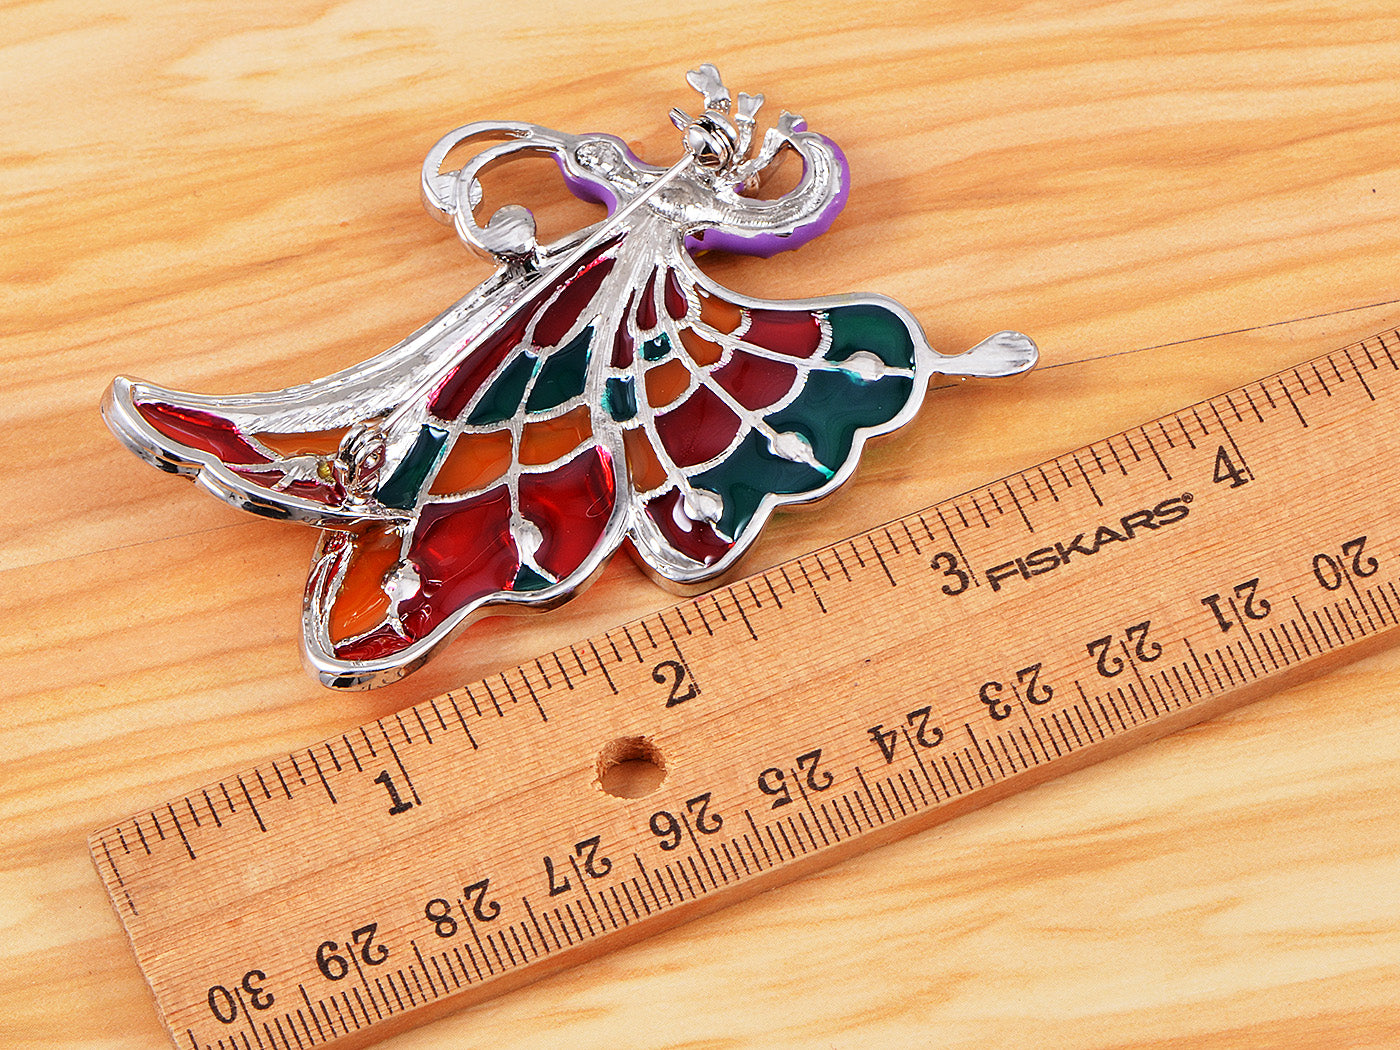 Abalone Colored Dark Butterfly Insect Wings Brooch Pin